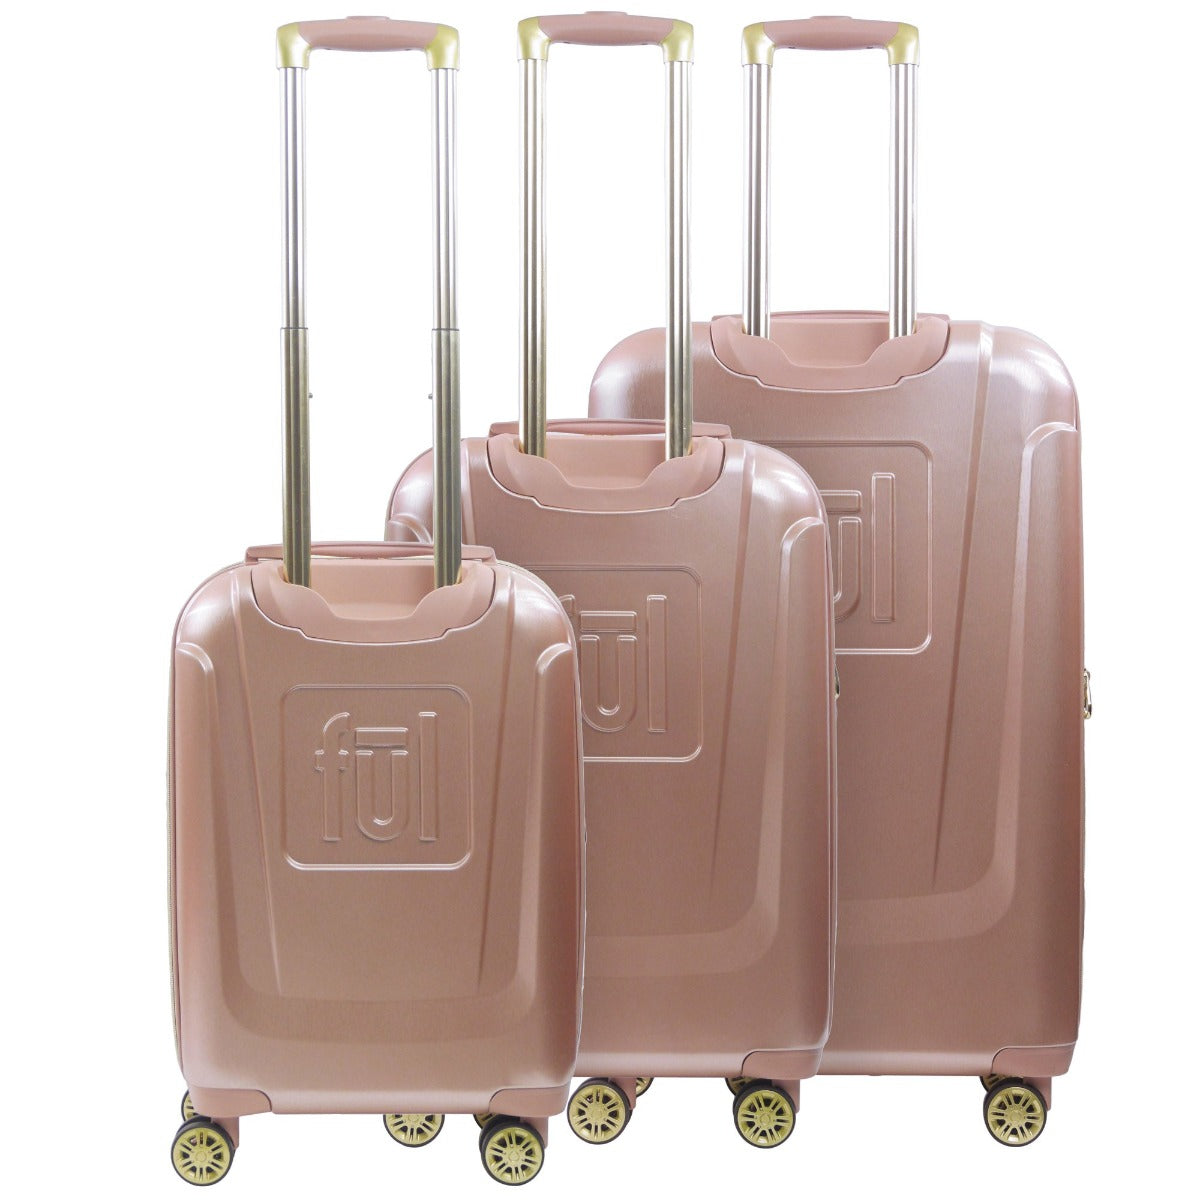 Ful Disney Minnie Mouse rolling suitcase 3 piece set rose gold - best luggage sets for travel